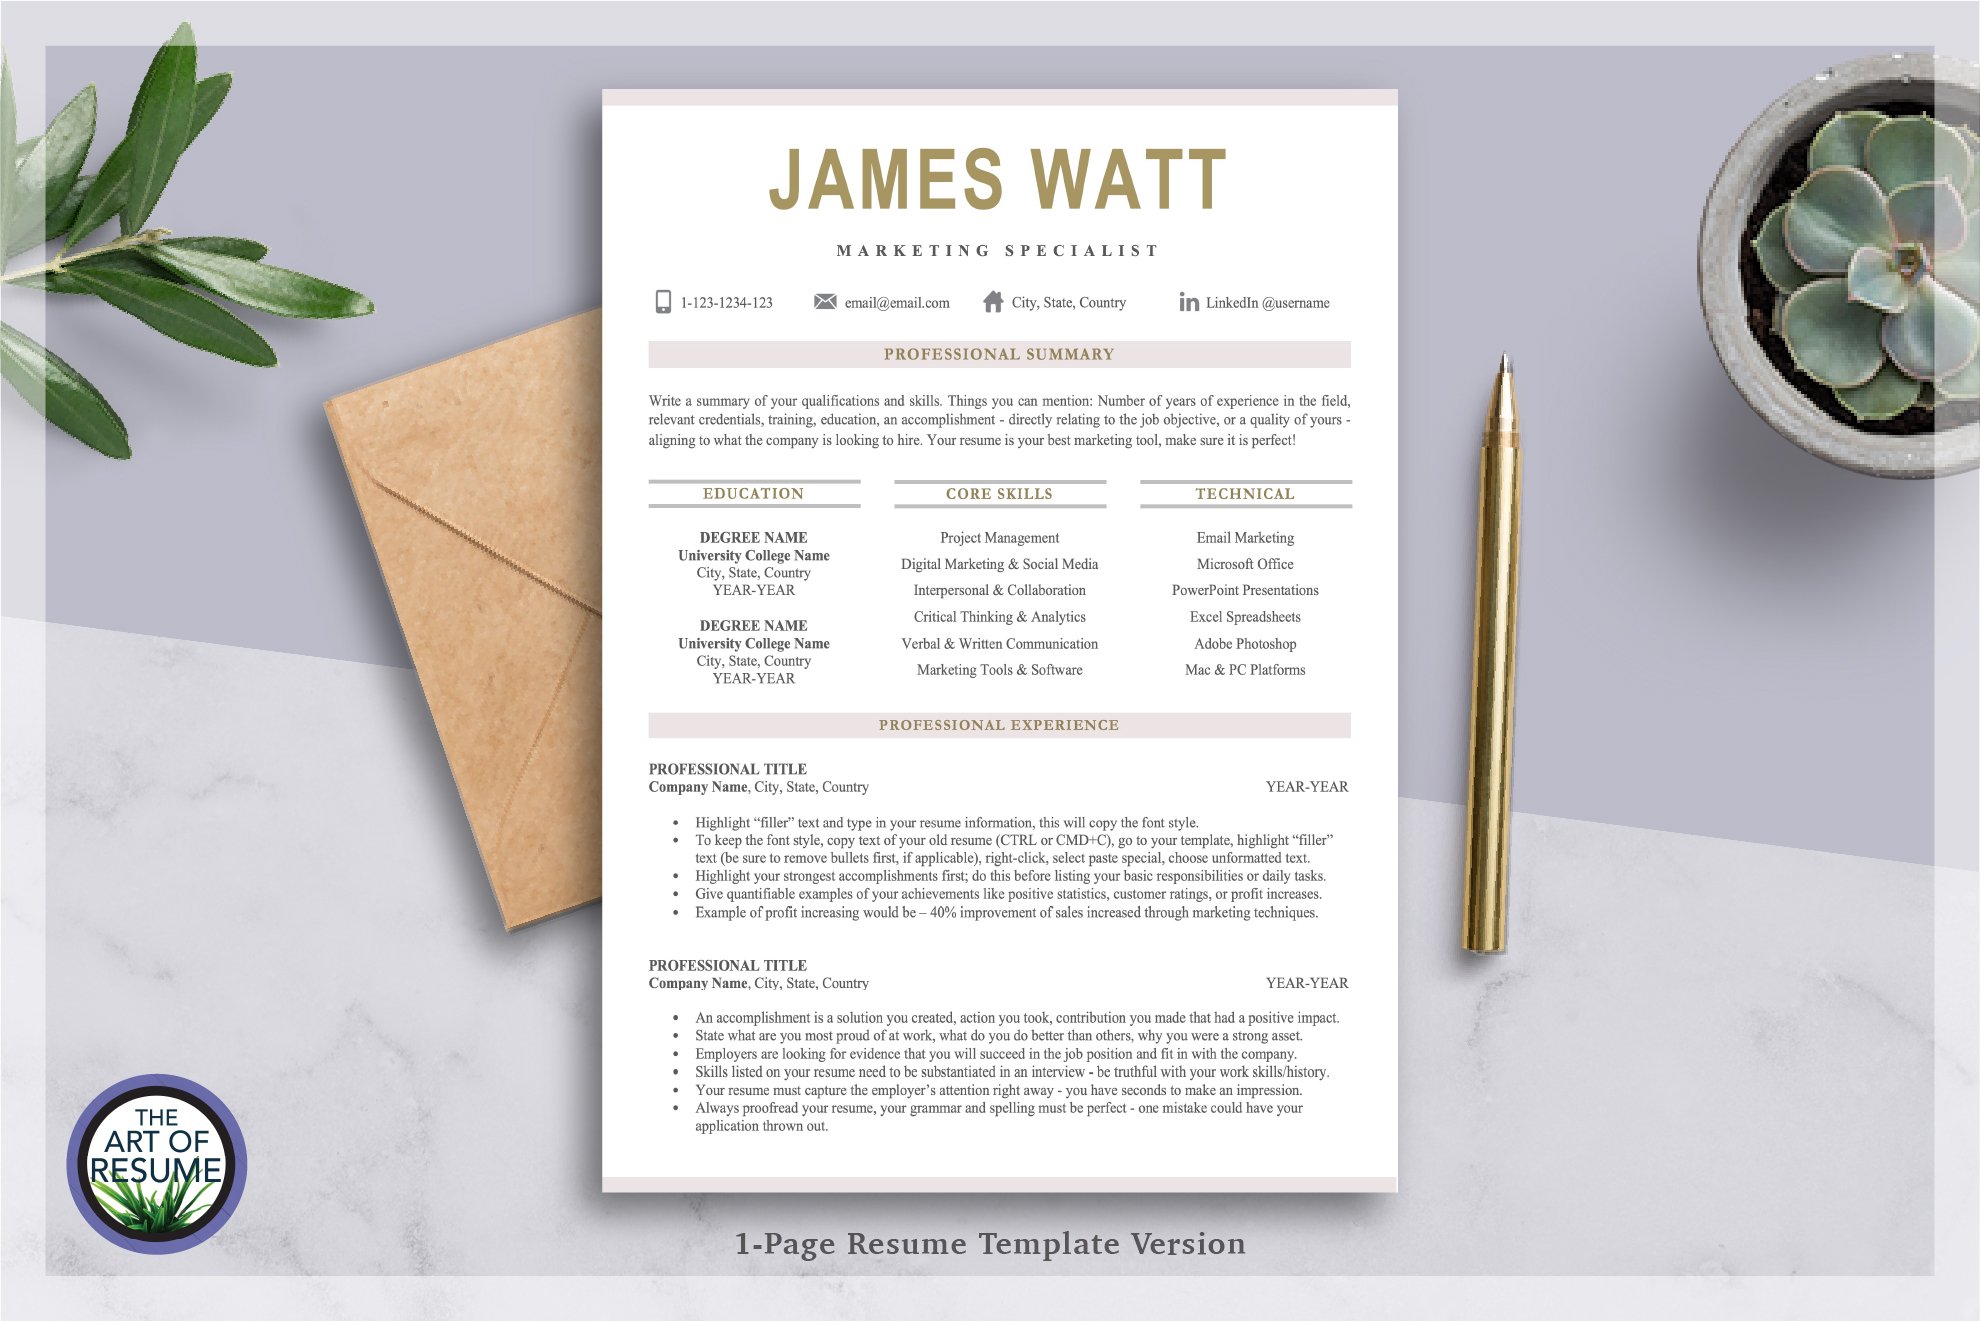 Resume Template | Free Cover Letter preview image.